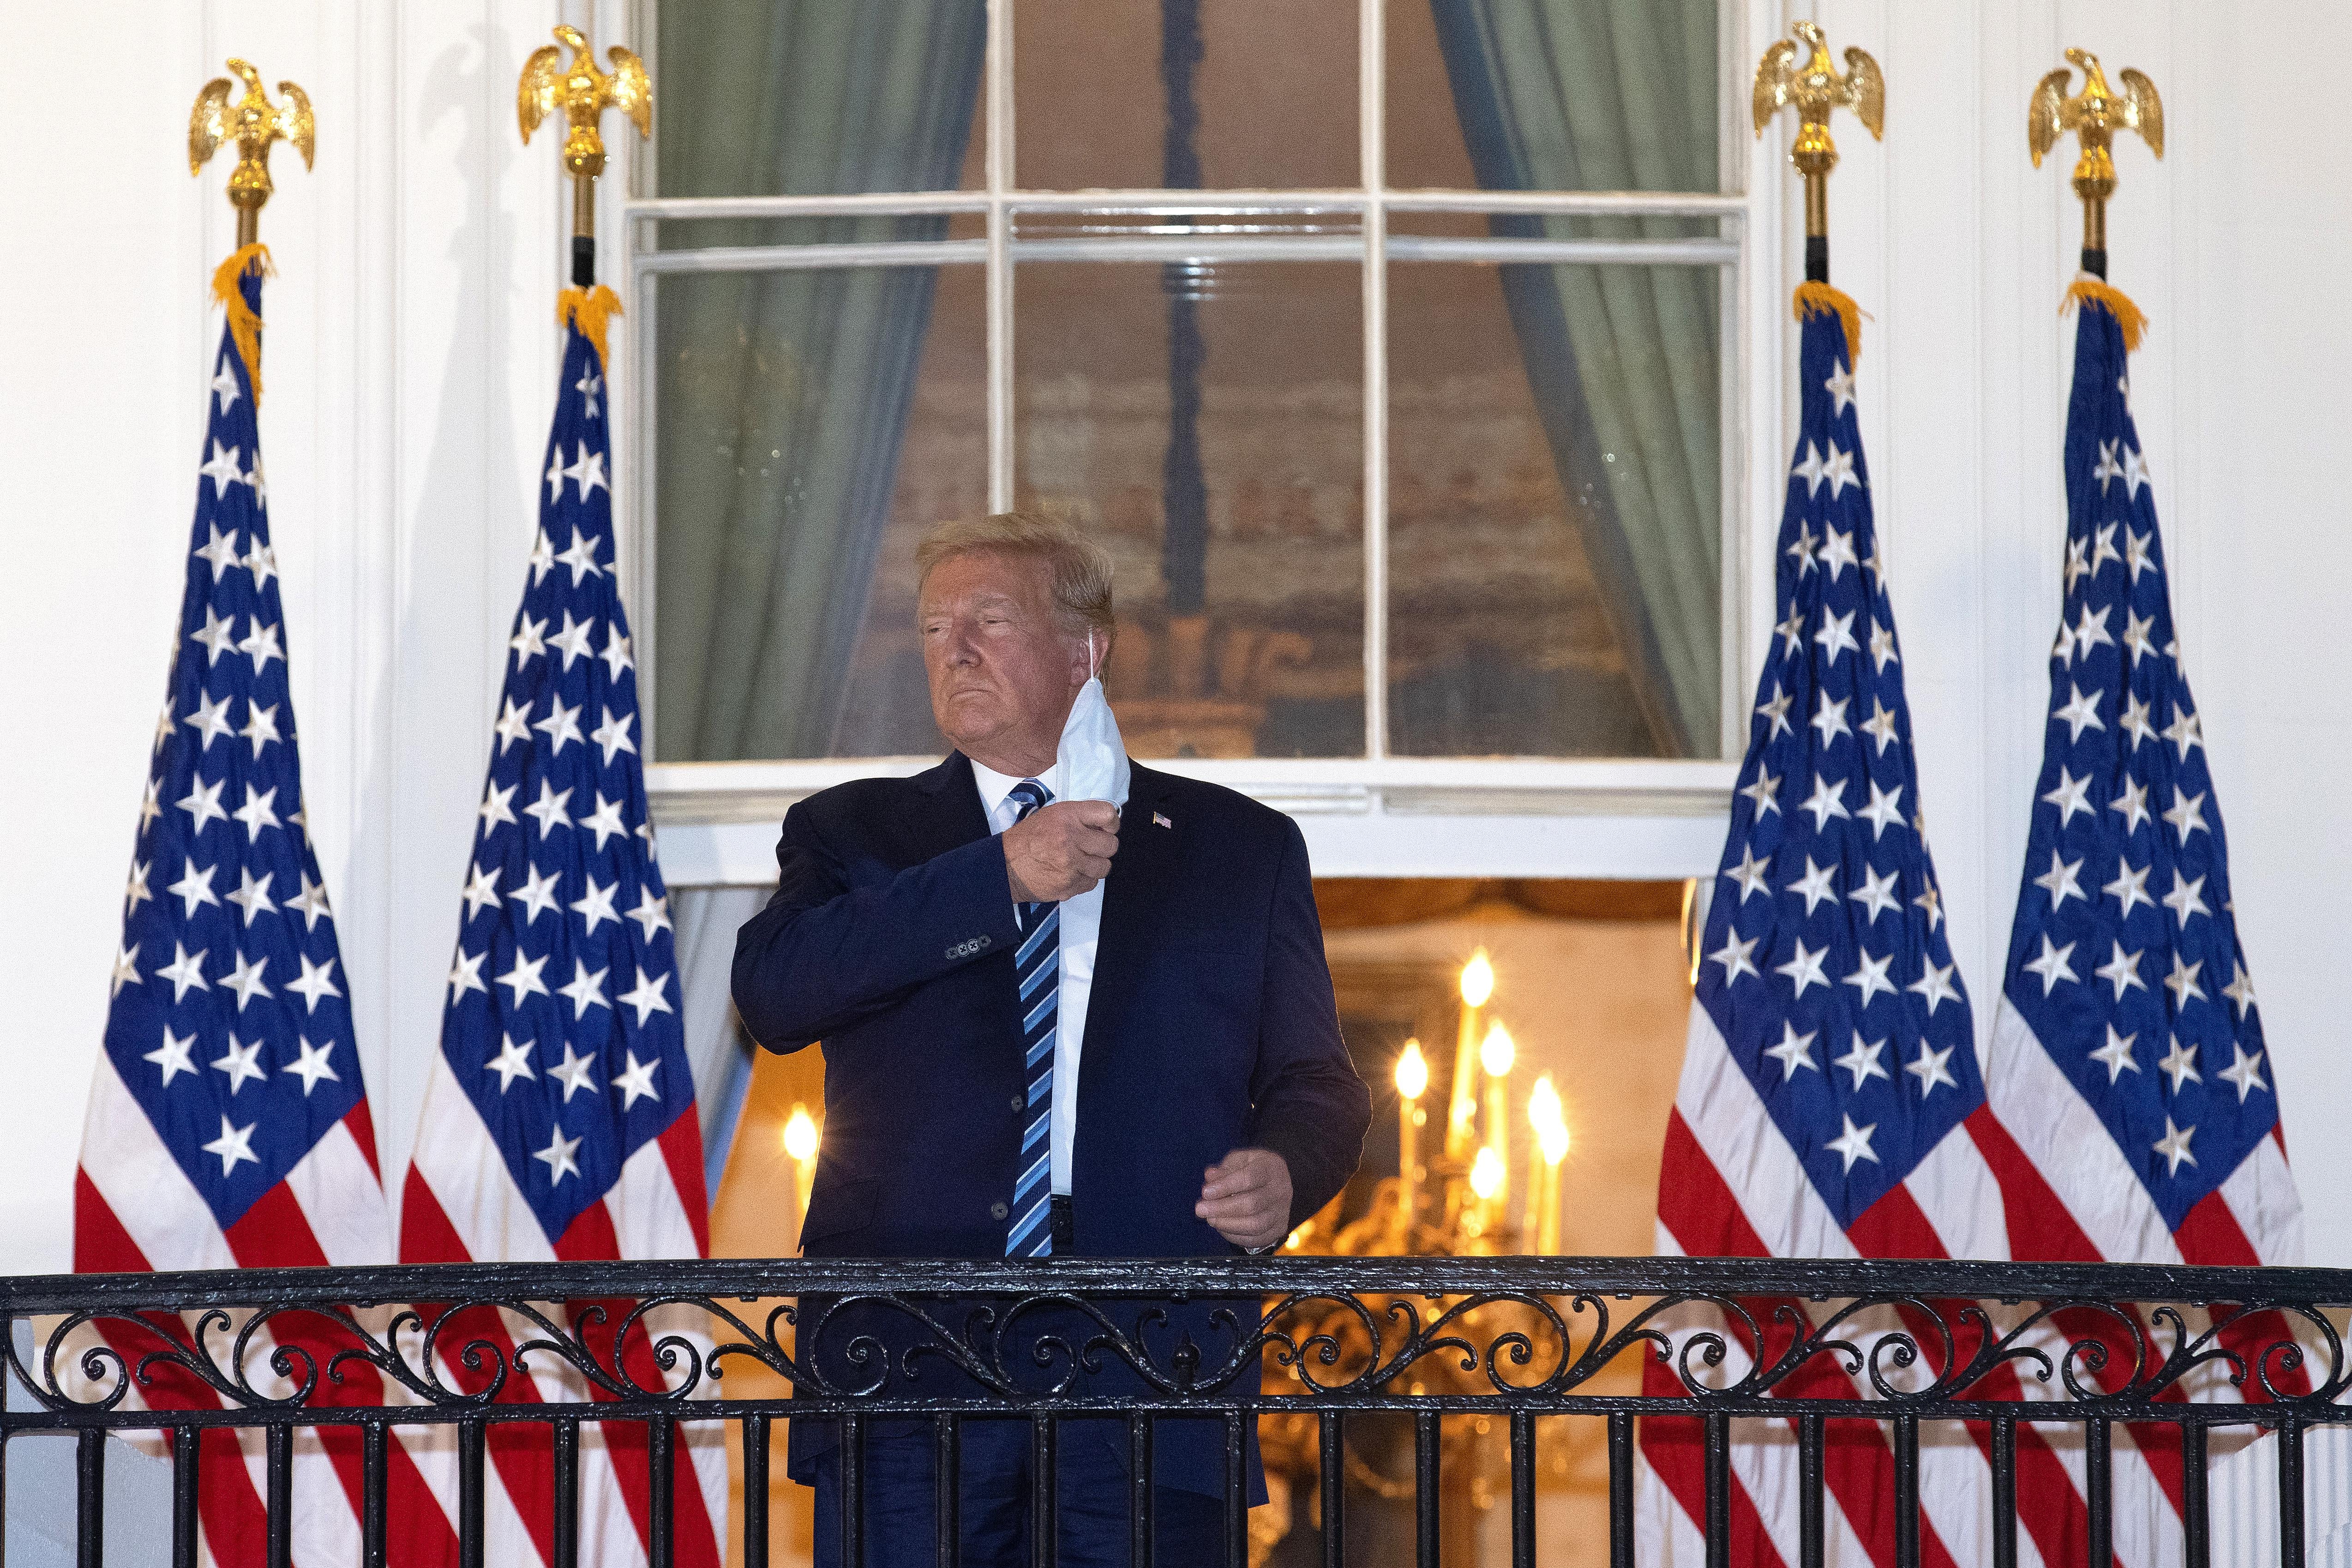 Donald Trump removes his mask while standing on a White House balcony